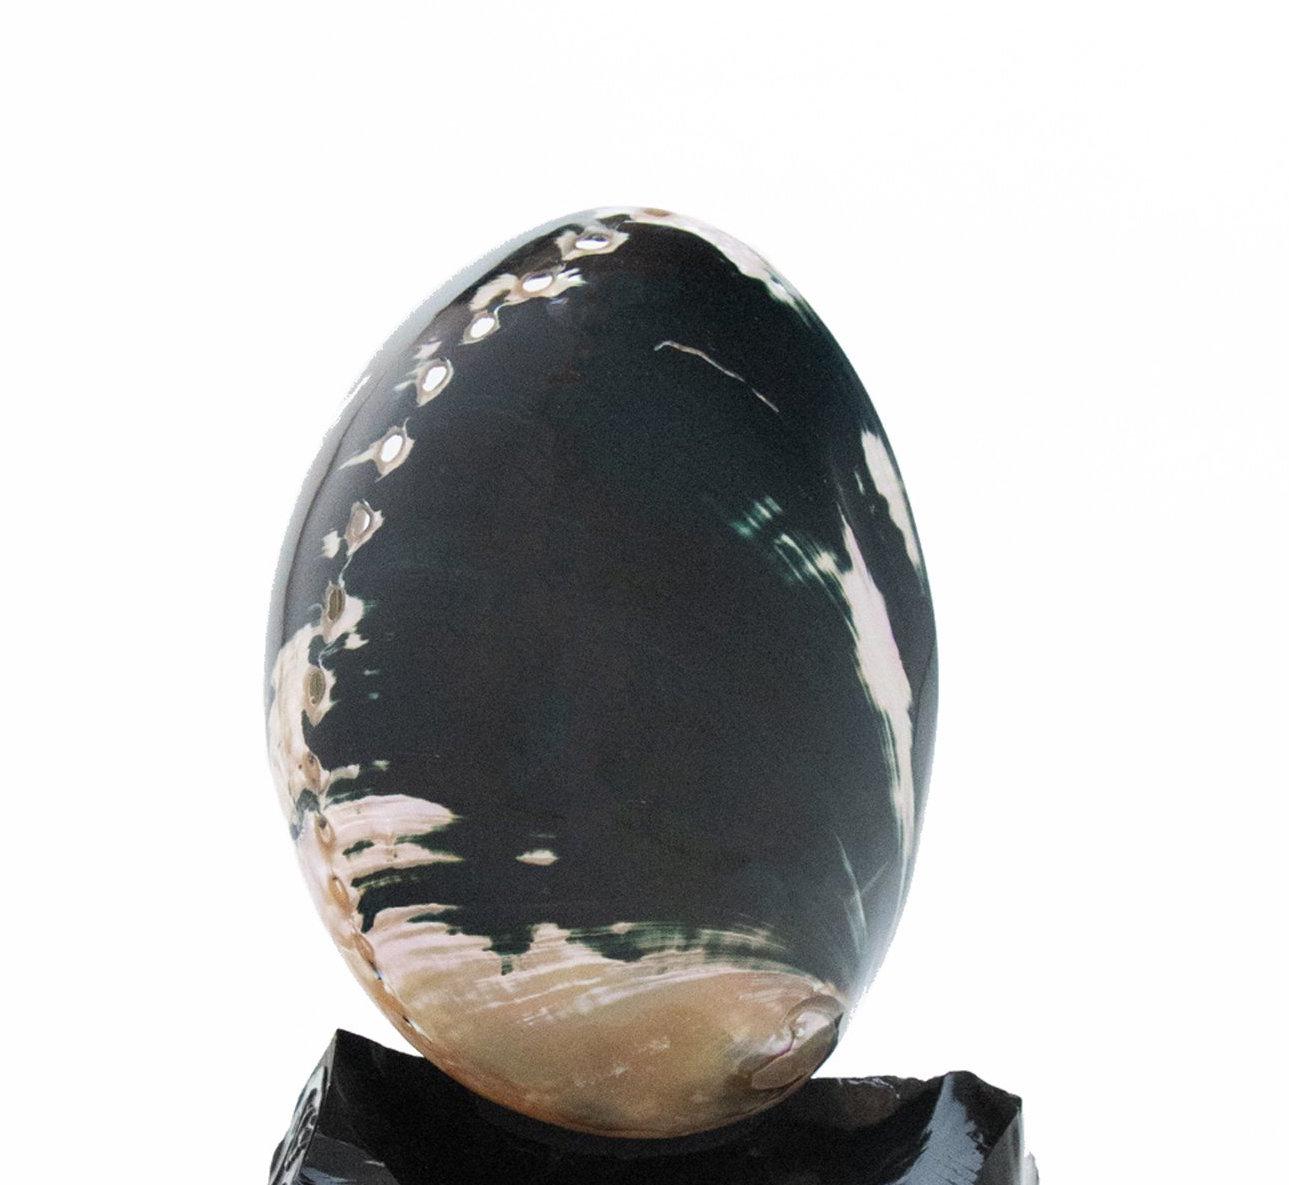 Black polished abalone shell on obsidian with baroque pearls. 

Abalone shells are known for their iridescent and pearlescent features. This rare form of abalone has a mostly black outer shell which is hard to come by and coordinates with the